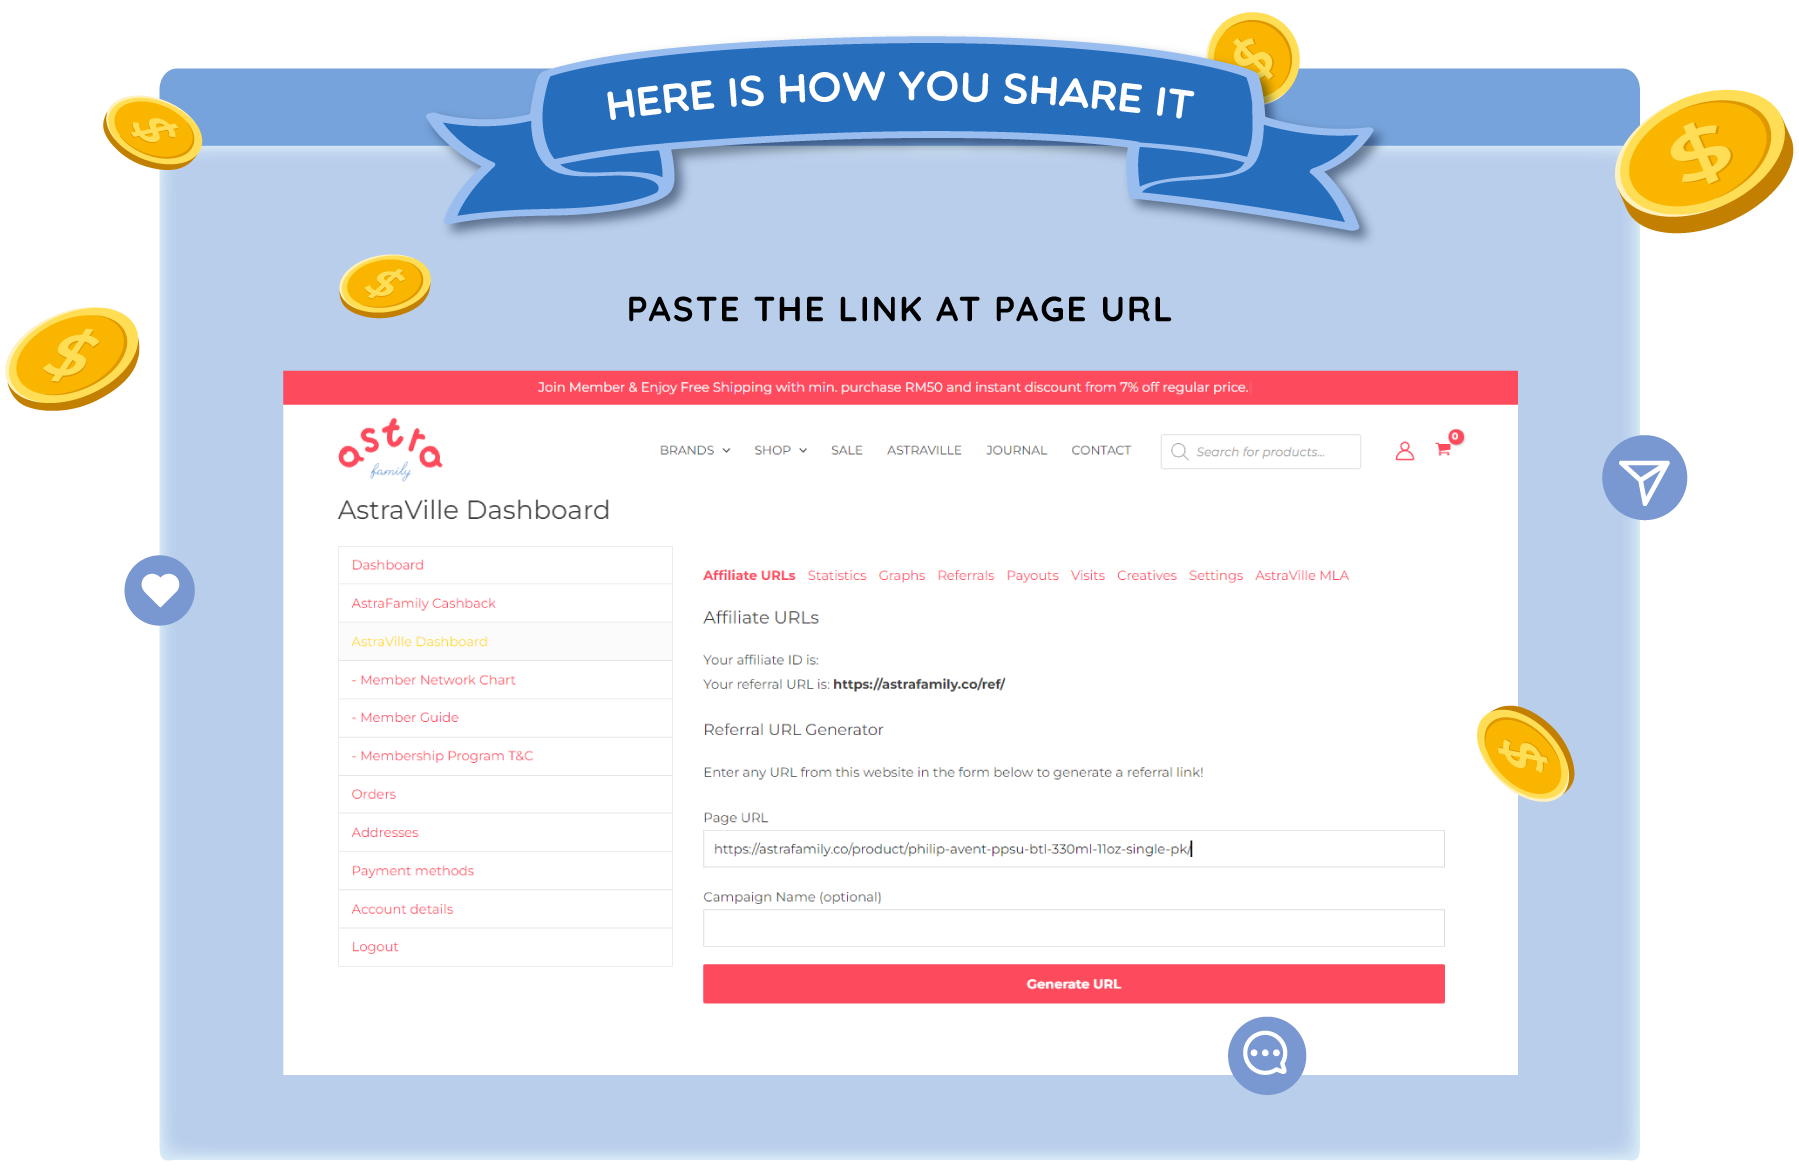 Astra Family A landing page where you can Share and Earn rewards, with the words 